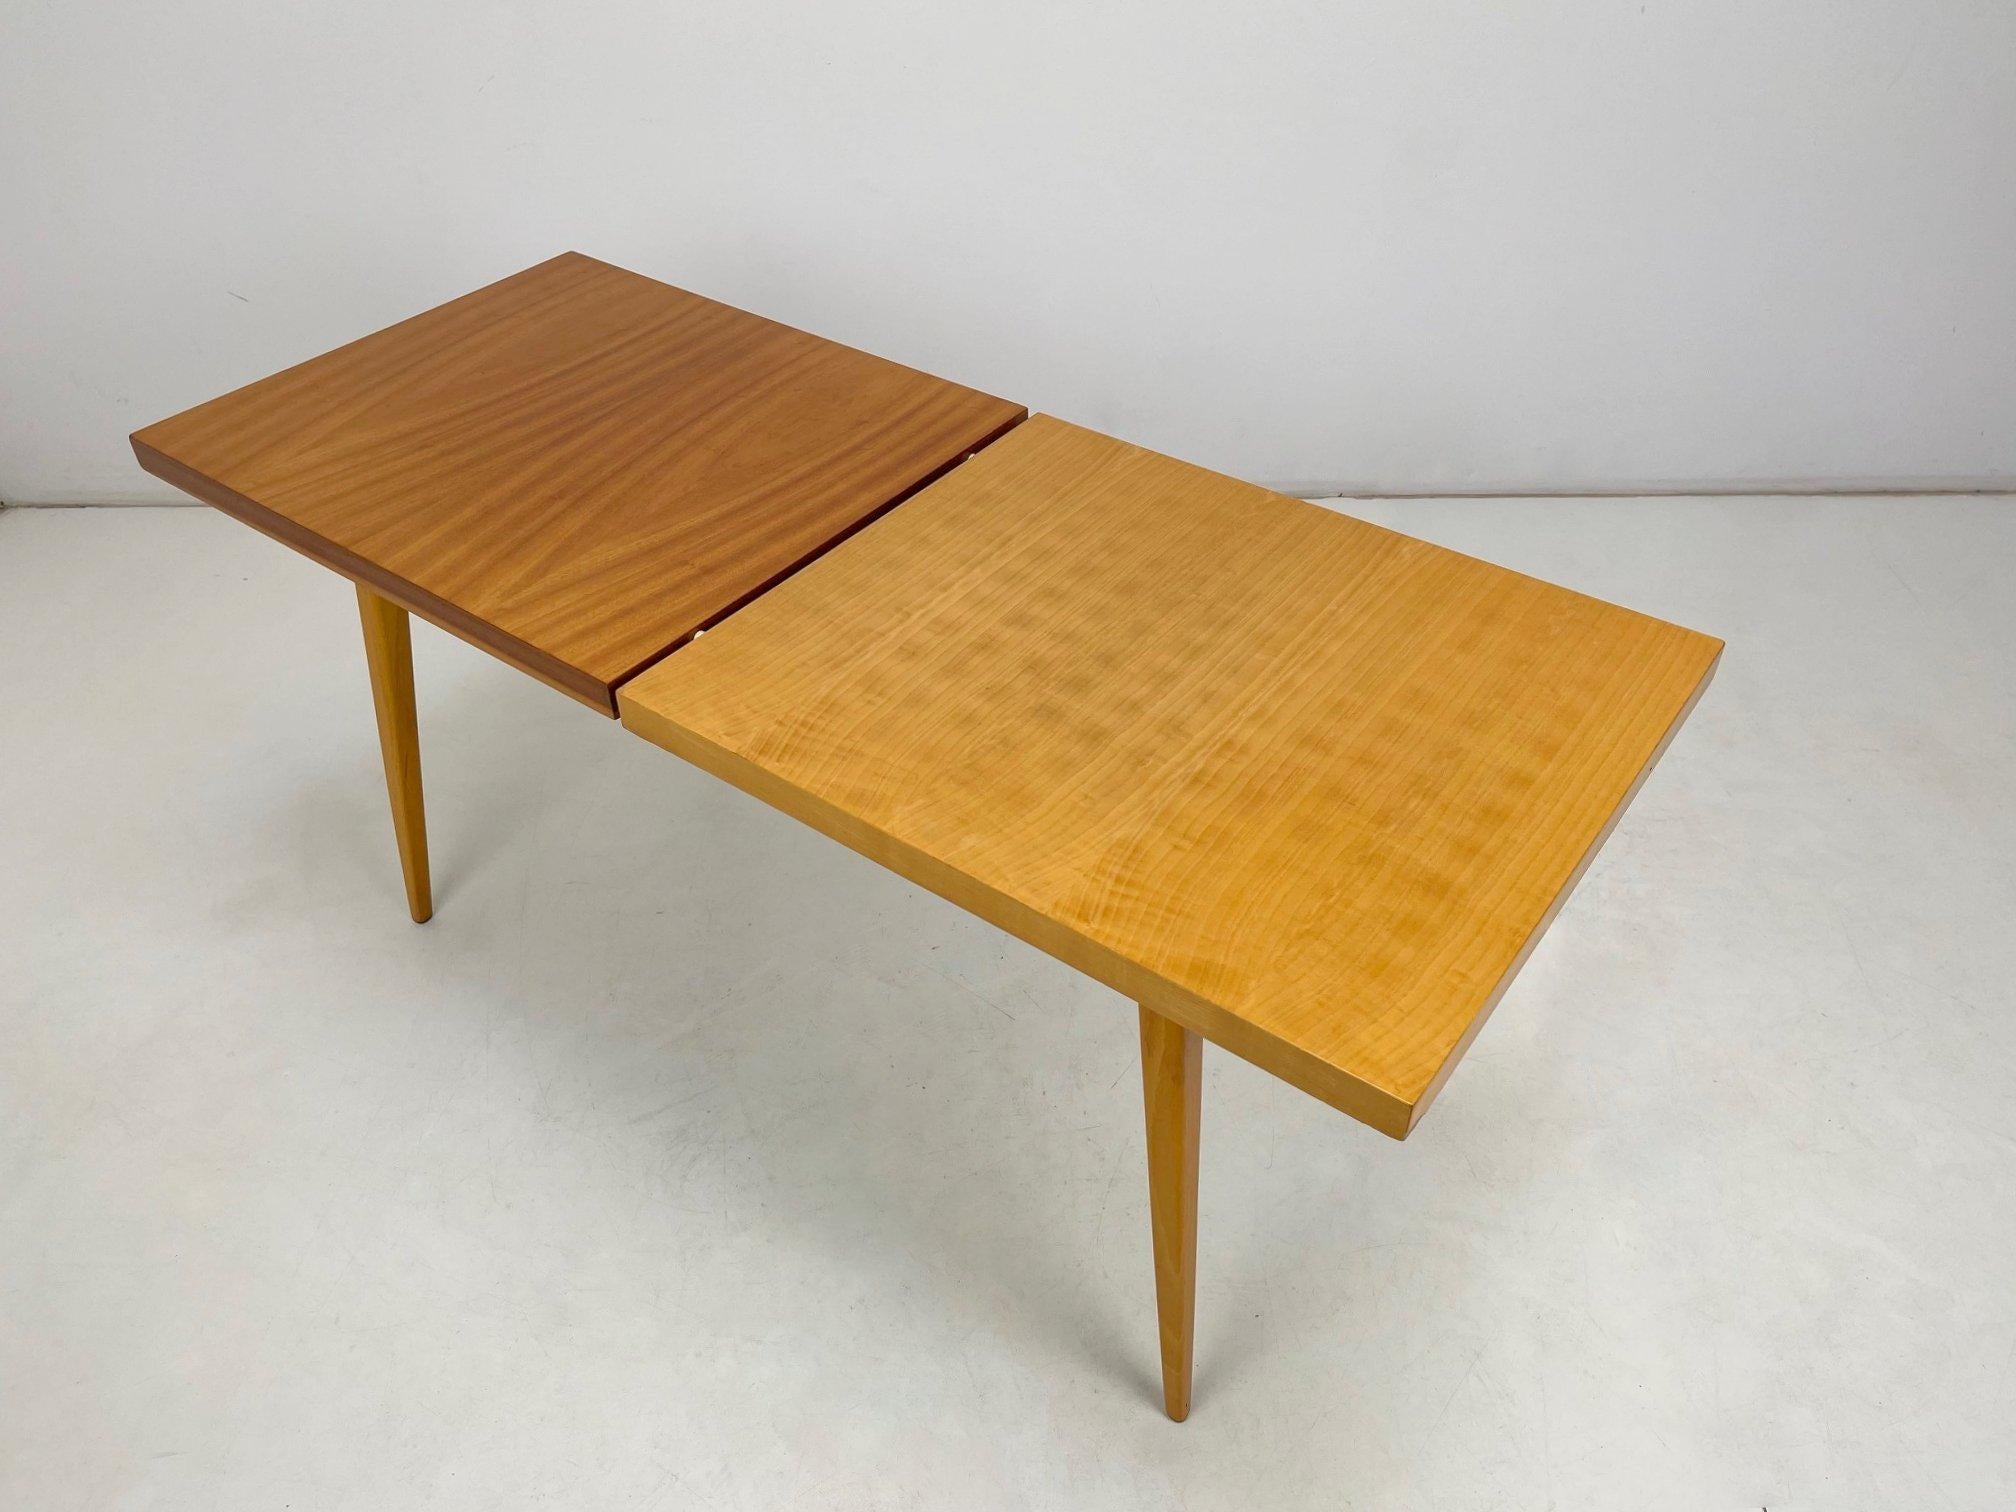 Vintage two-tone coffee table from former Czechoslovakia. The top is in glossy finish.